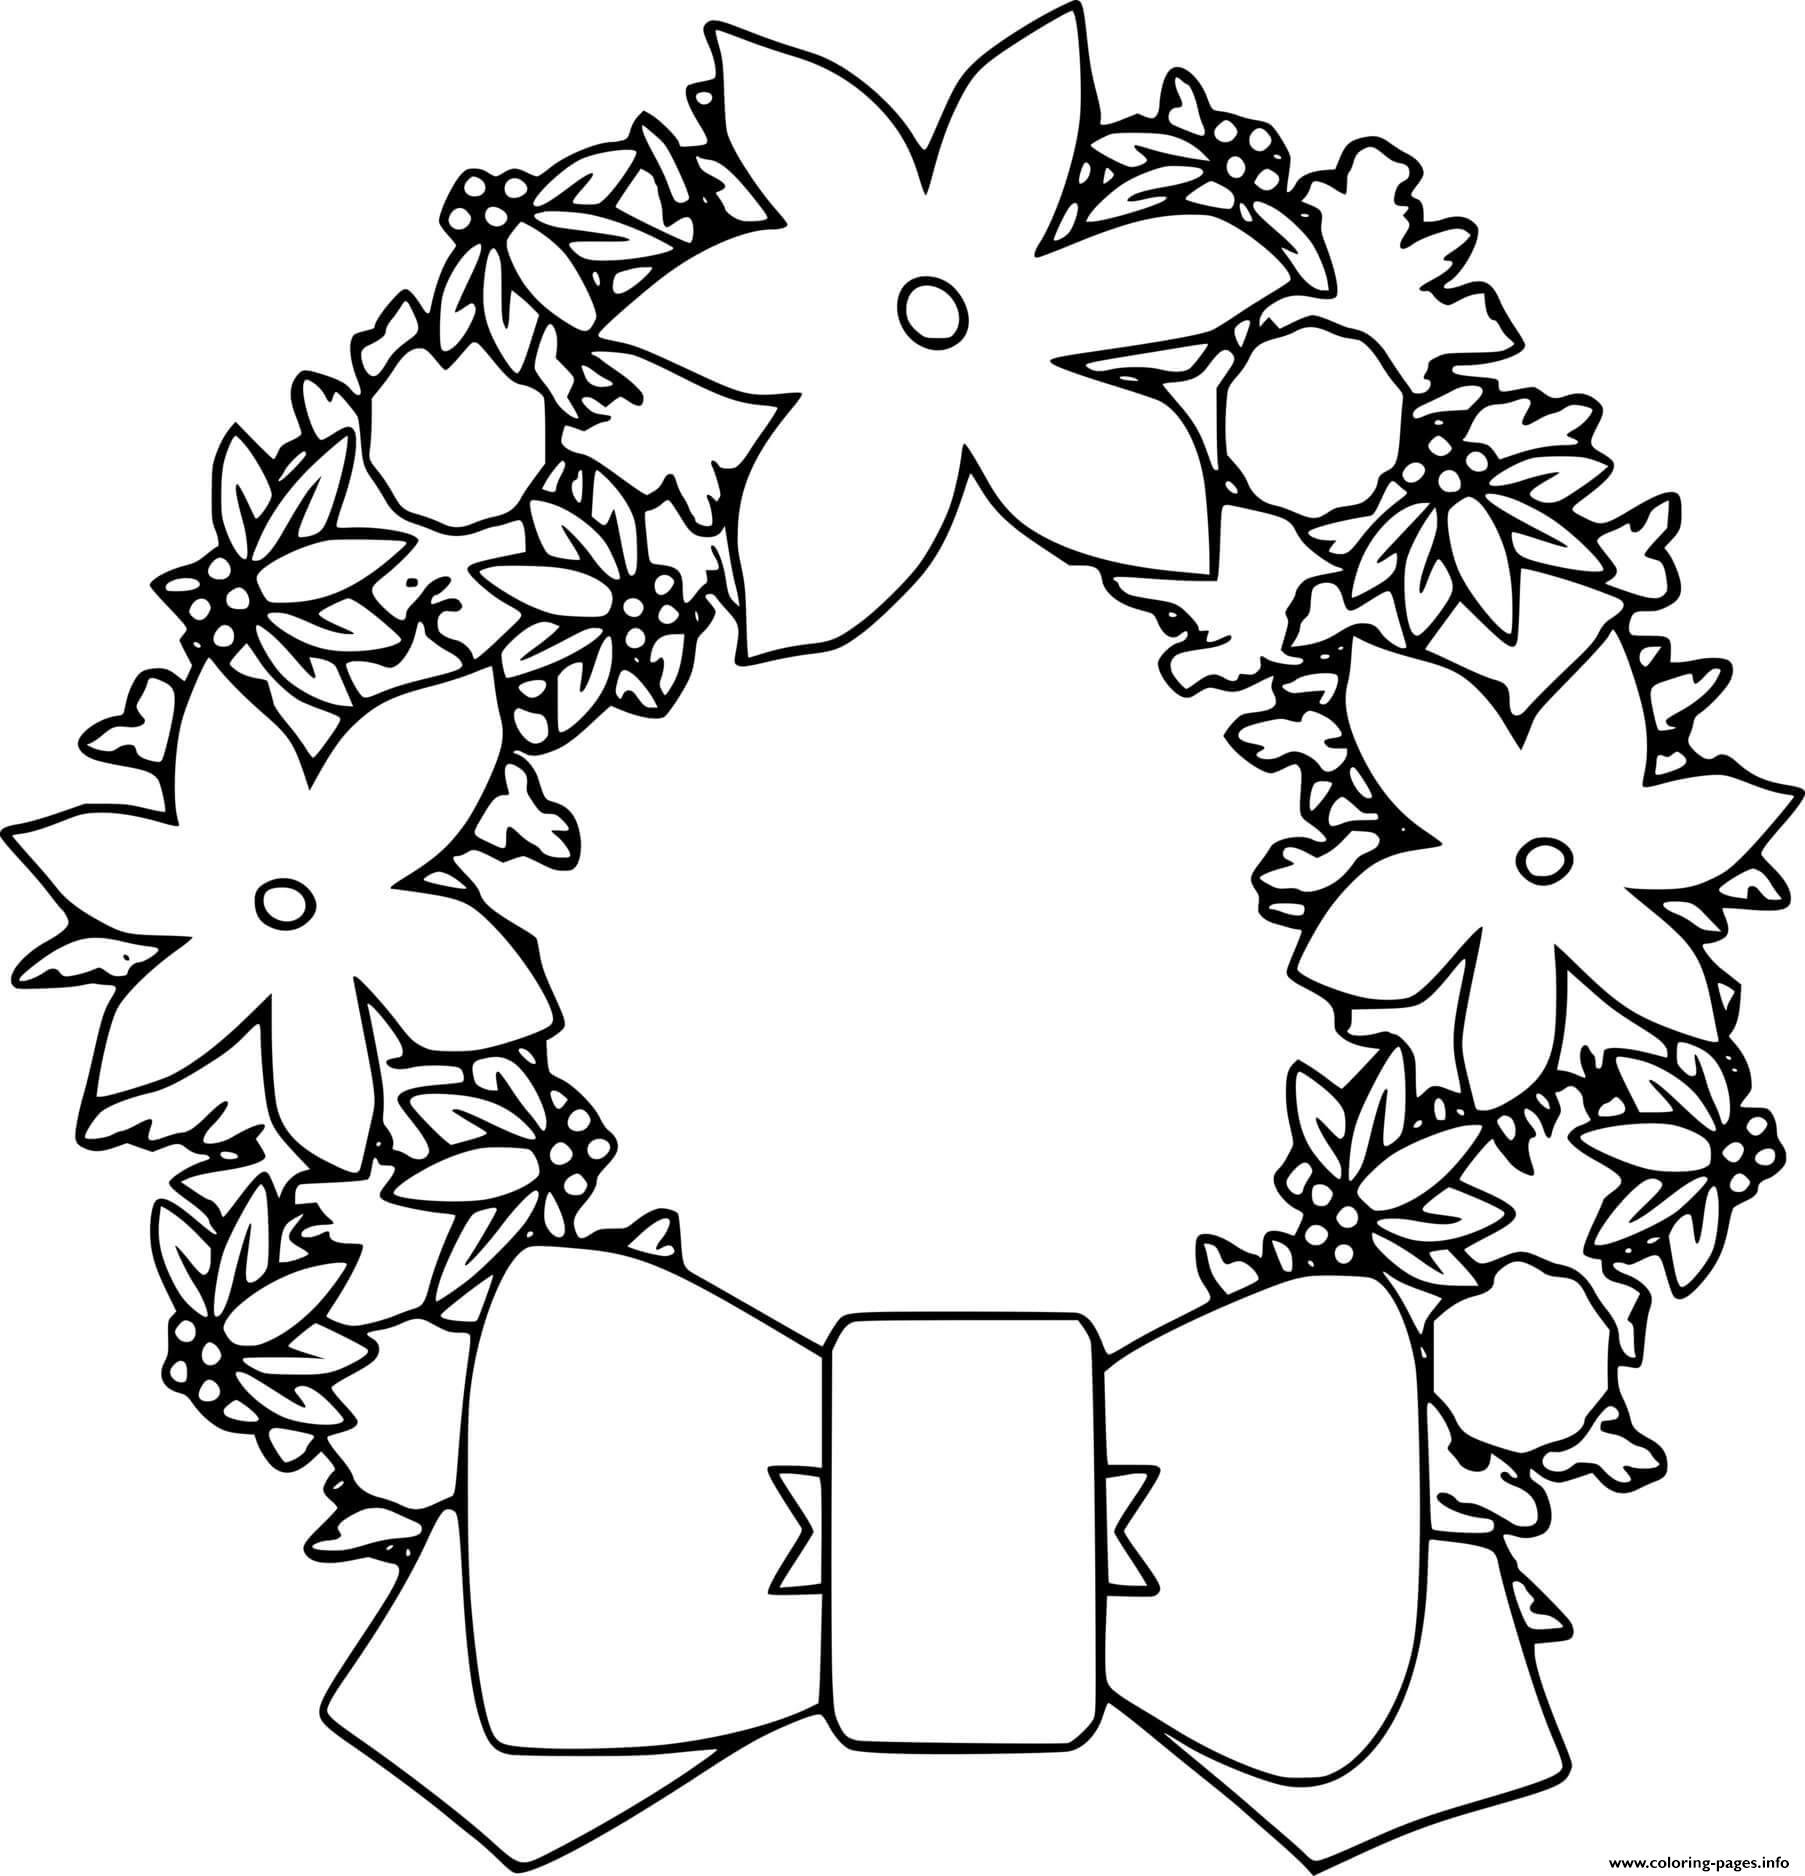 Poinsettia Wreath With A Bowknot coloring